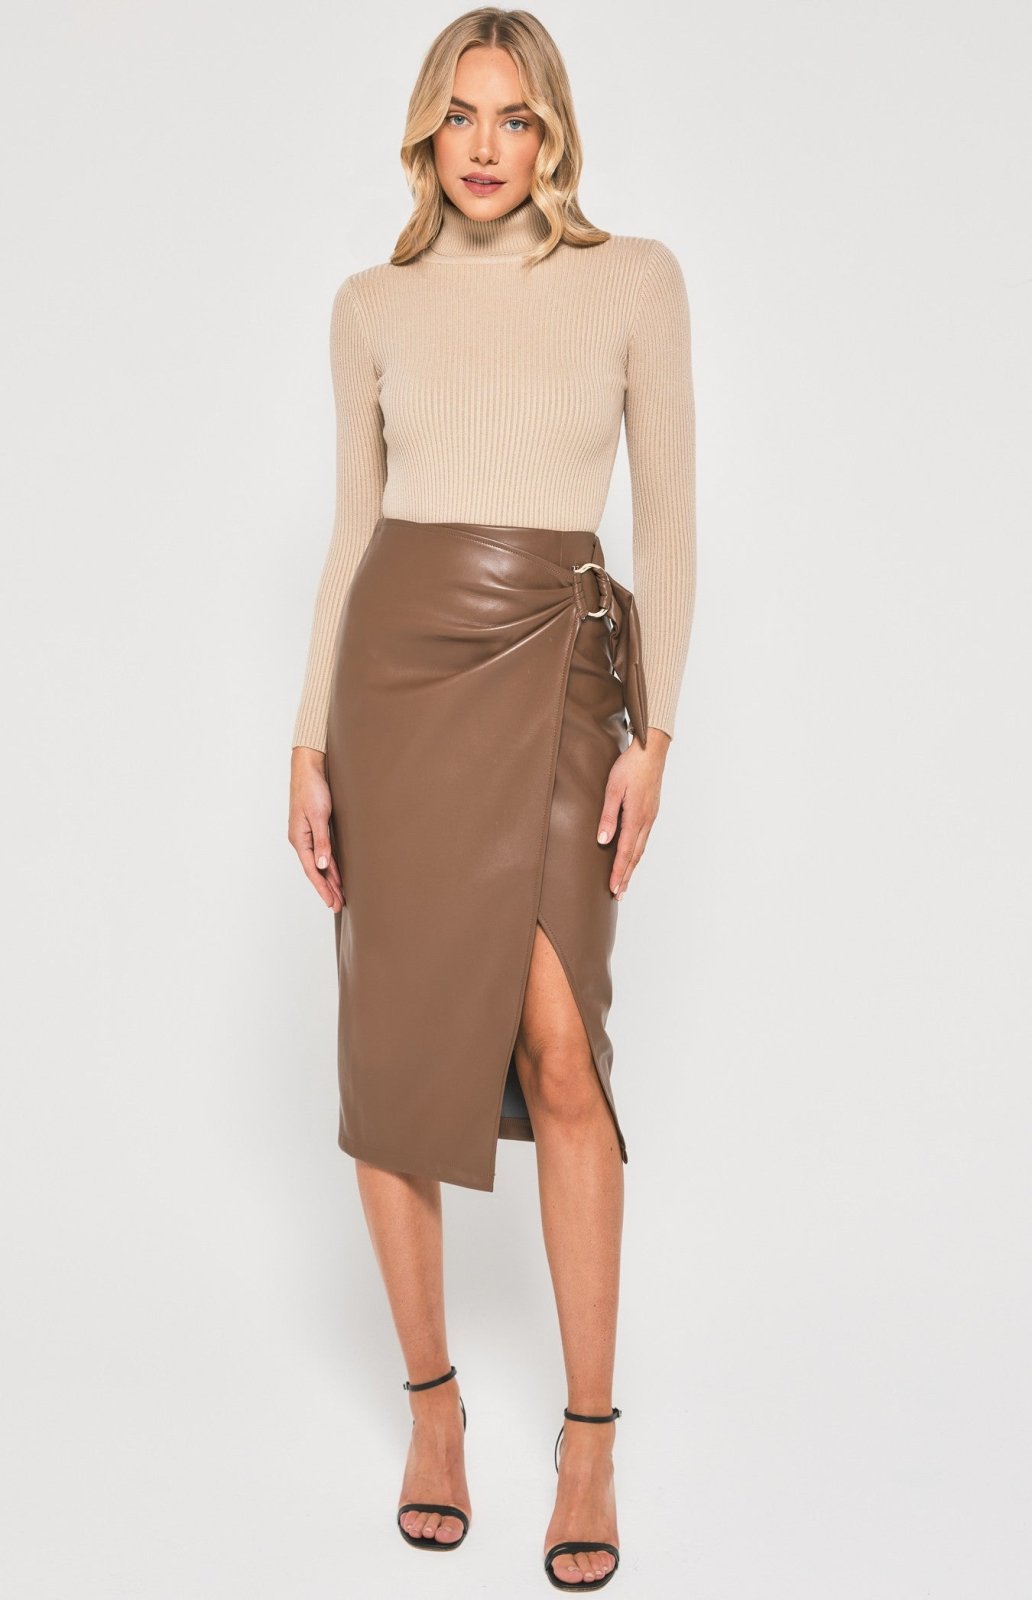 St Lucia Boutique Tyla faux leather midi skirt - chocolate - Shop women's at St Lucia Boutique